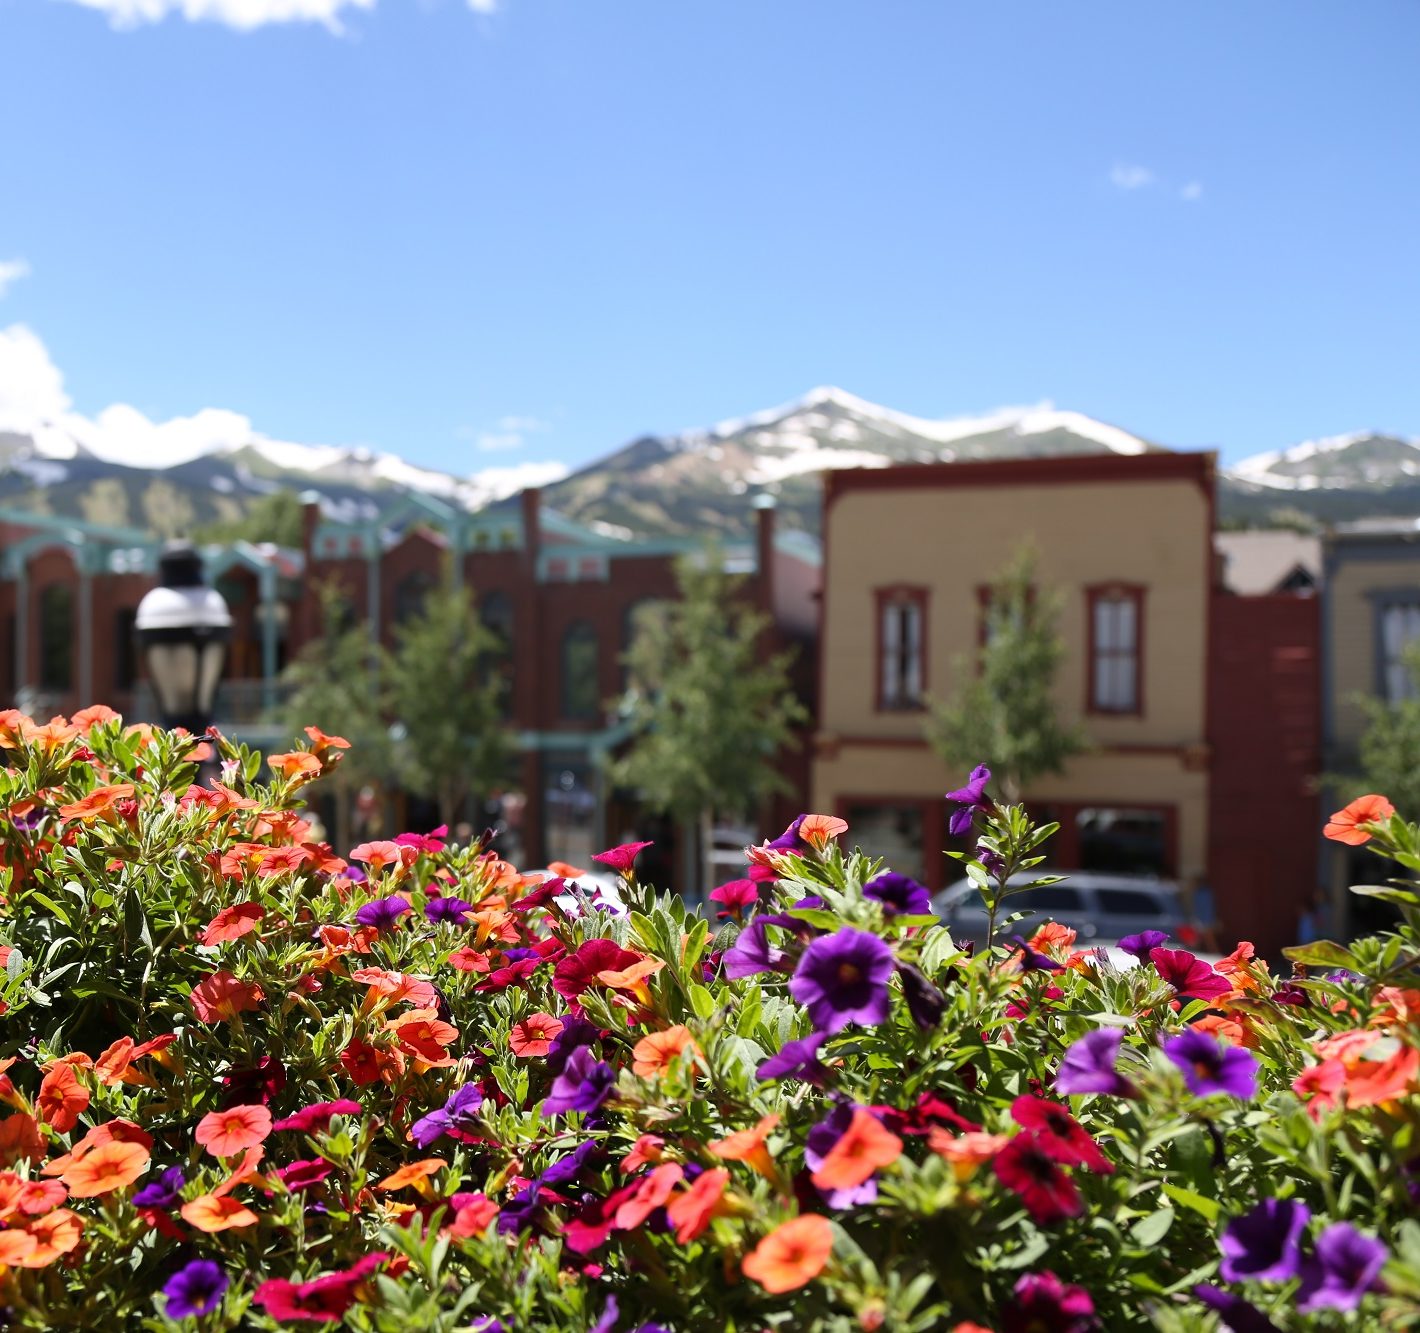 Colorful flowers outside in downtown Breckenridge